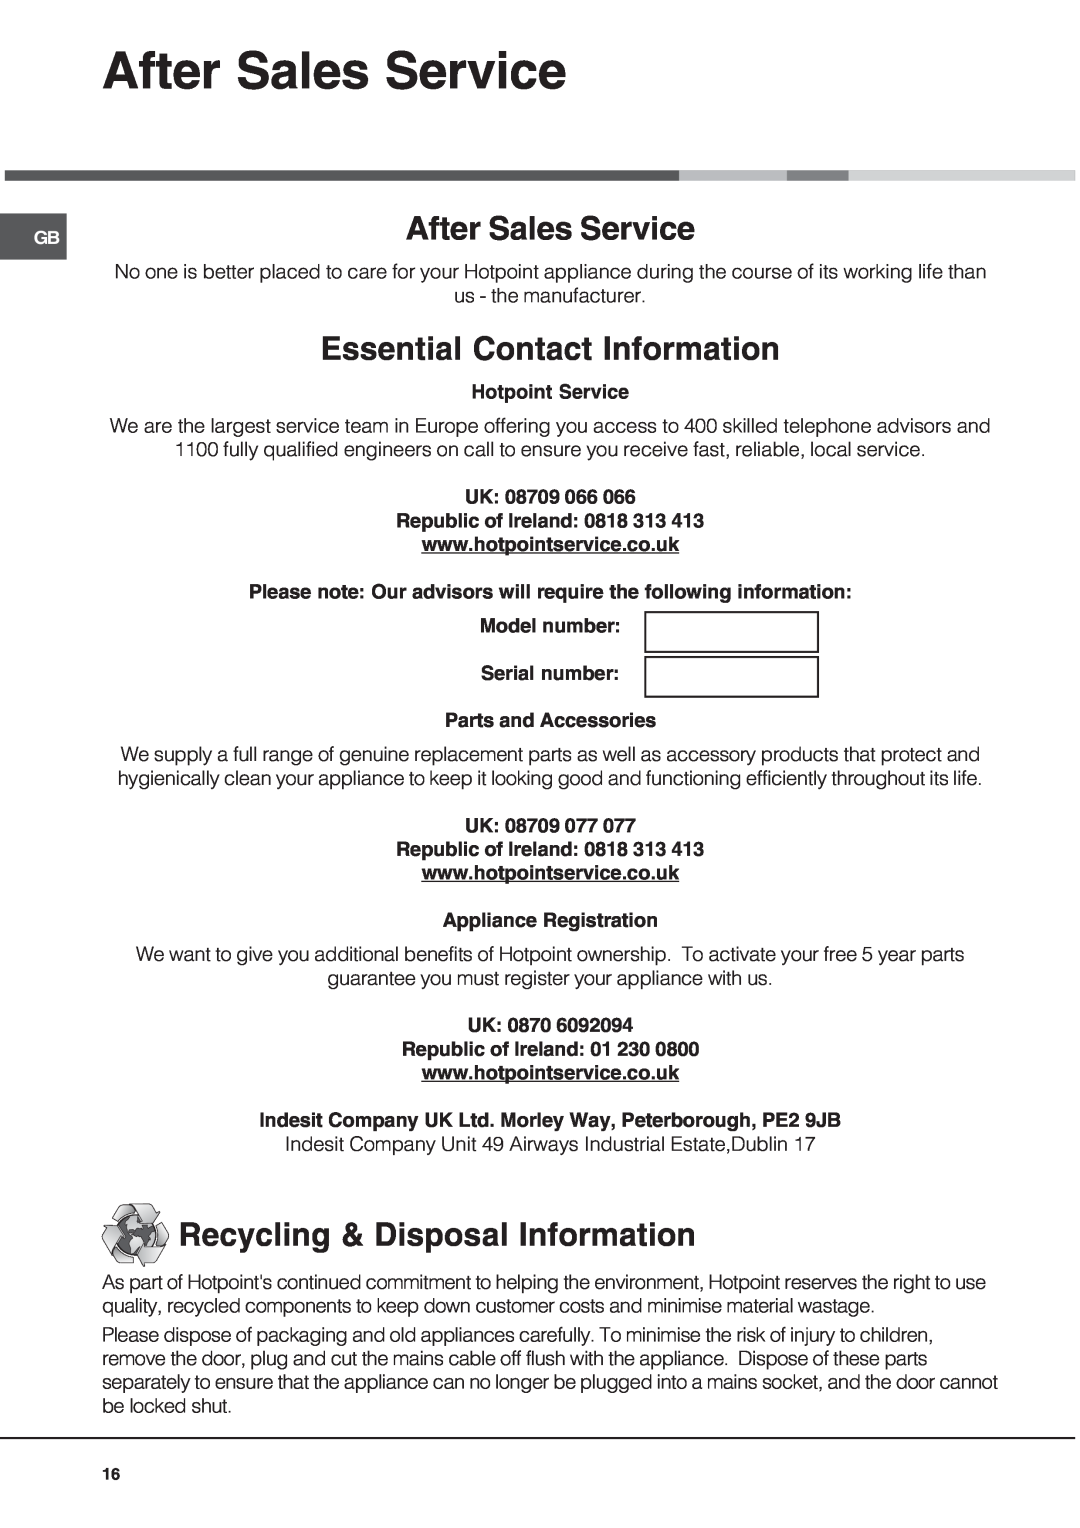 Hotpoint SE48101PX manual After Sales Service, Essential Contact Information, Recycling & Disposal Information 